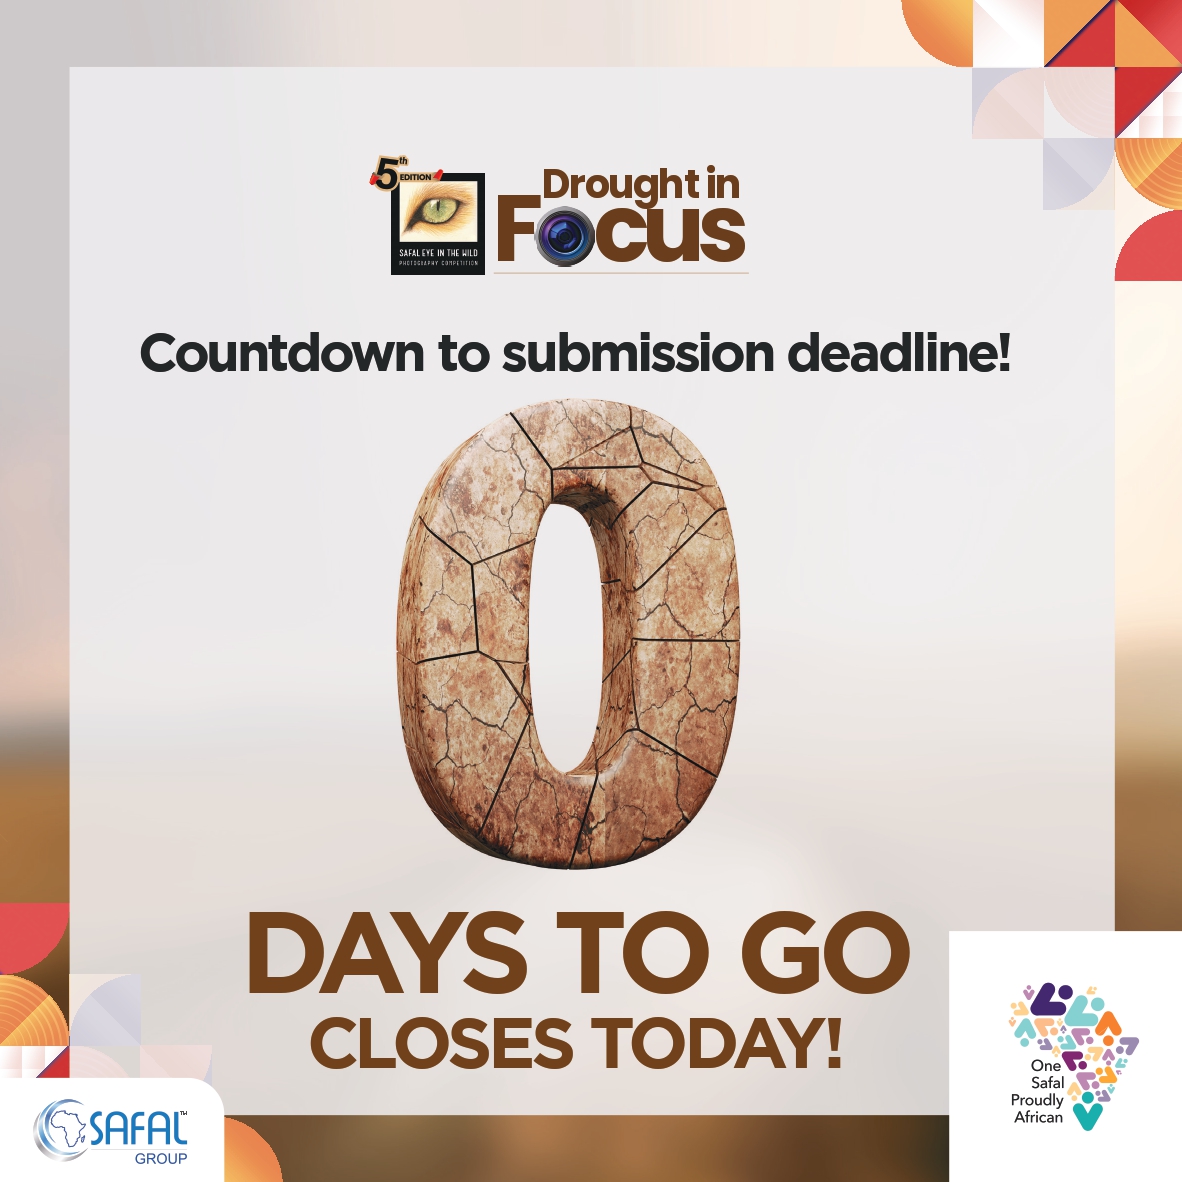 ⏳ Time is running out! Don't miss the chance to tell your #DroughtInFocus story! Submit your entries before the clock strikes midnight tonight! 🌟📢 #LastCall #DroughtInFocus #SubmitNow